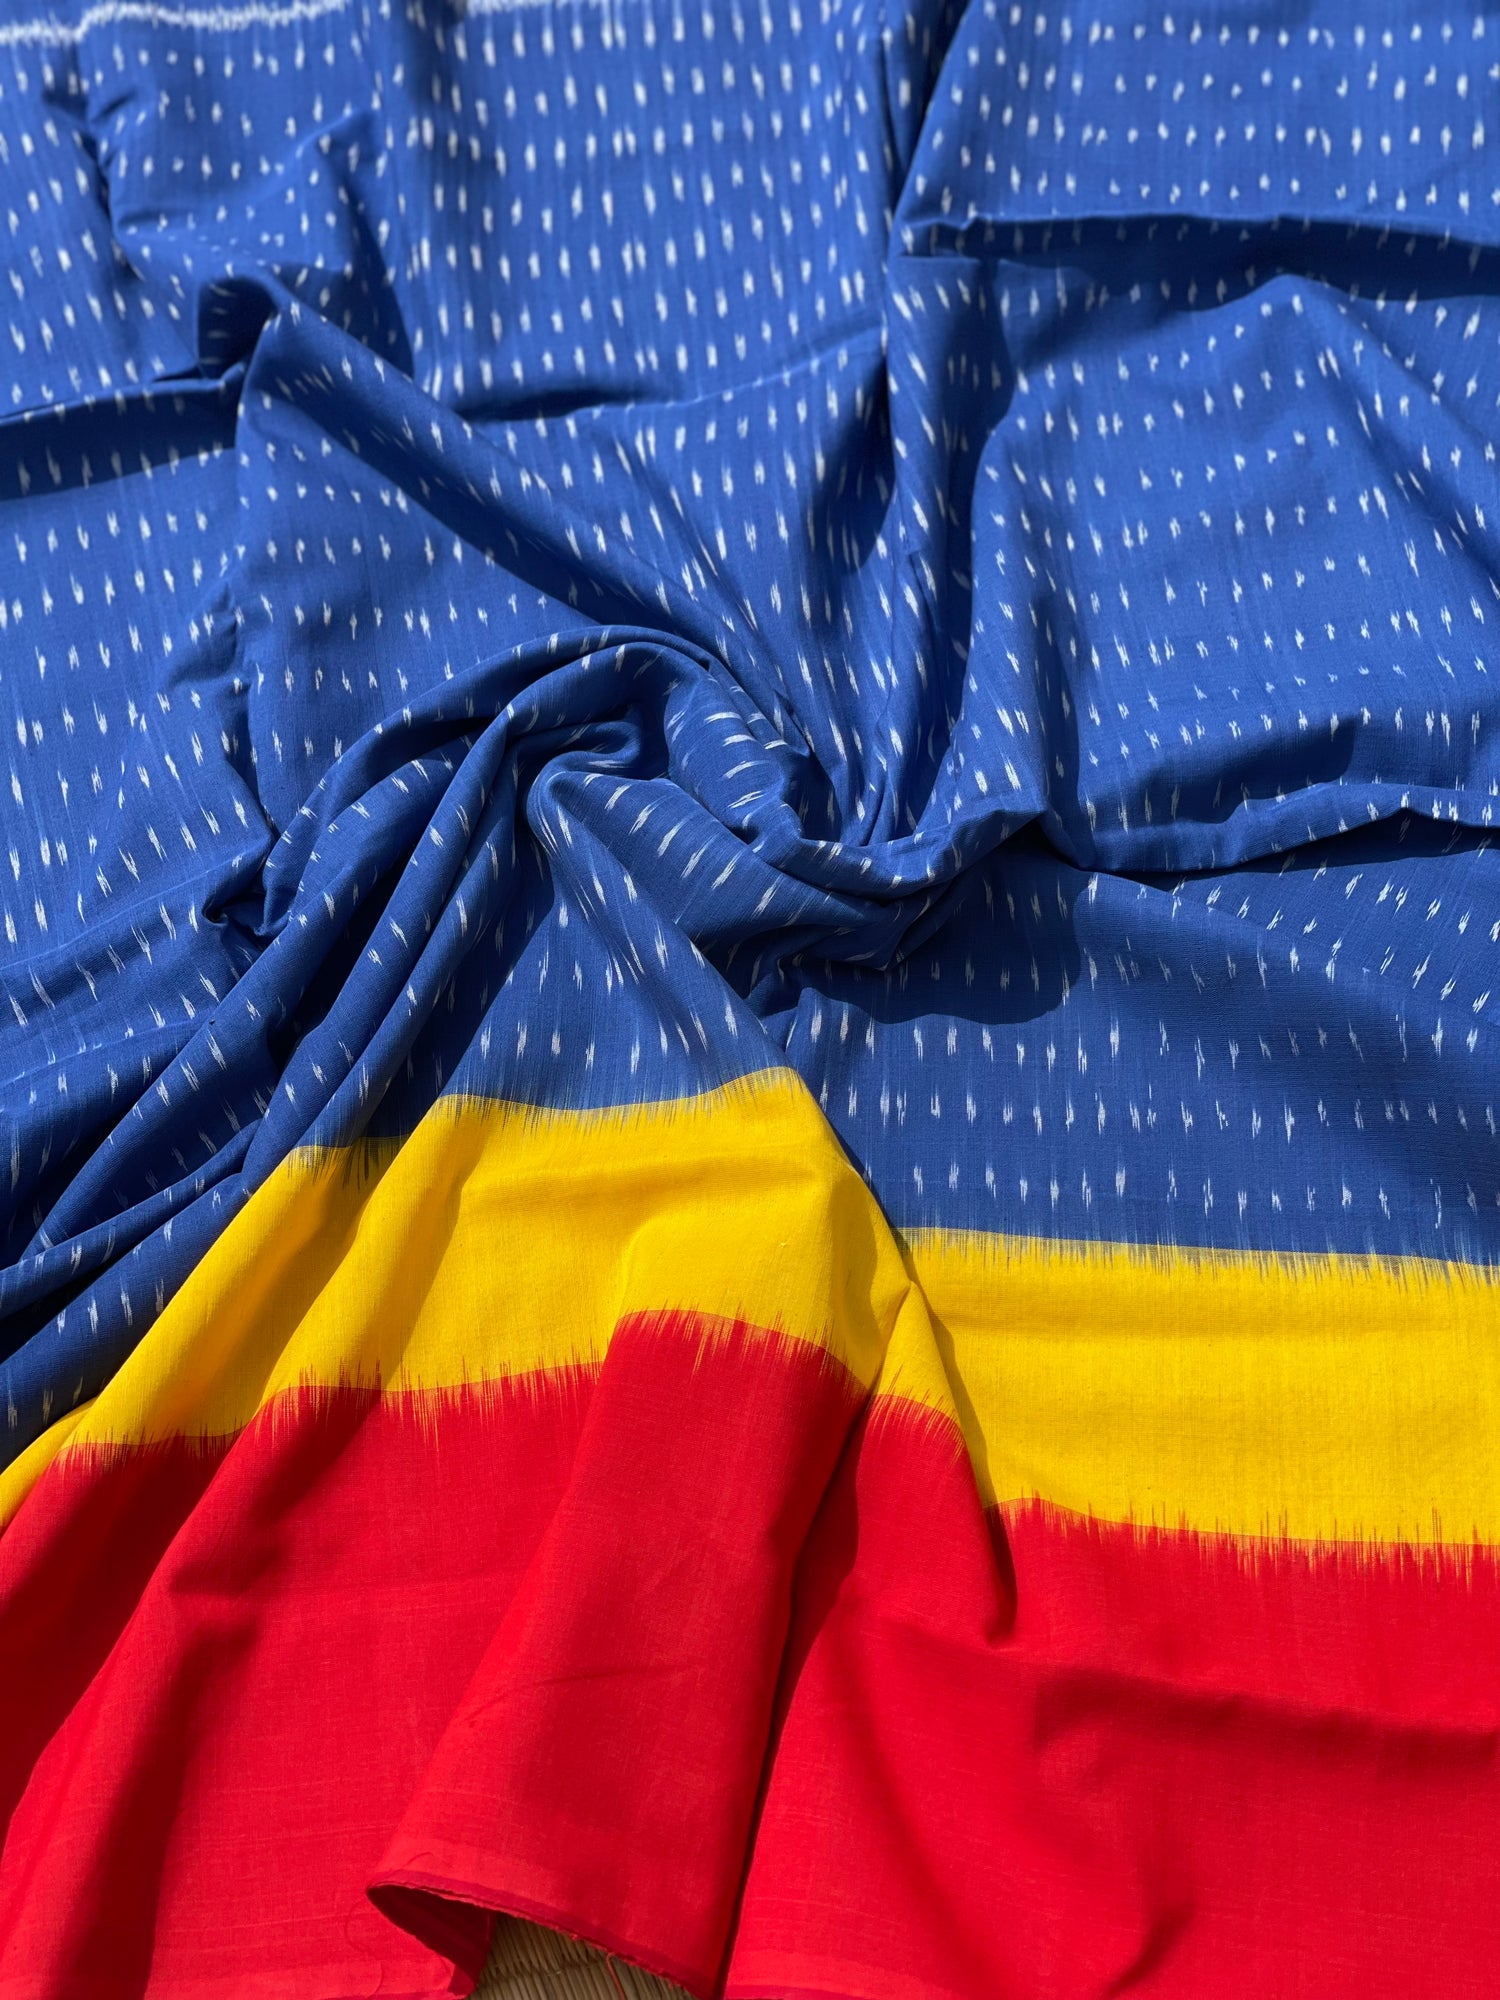 Beautiful weft ikkat cotton Saree with in yellow red and blue